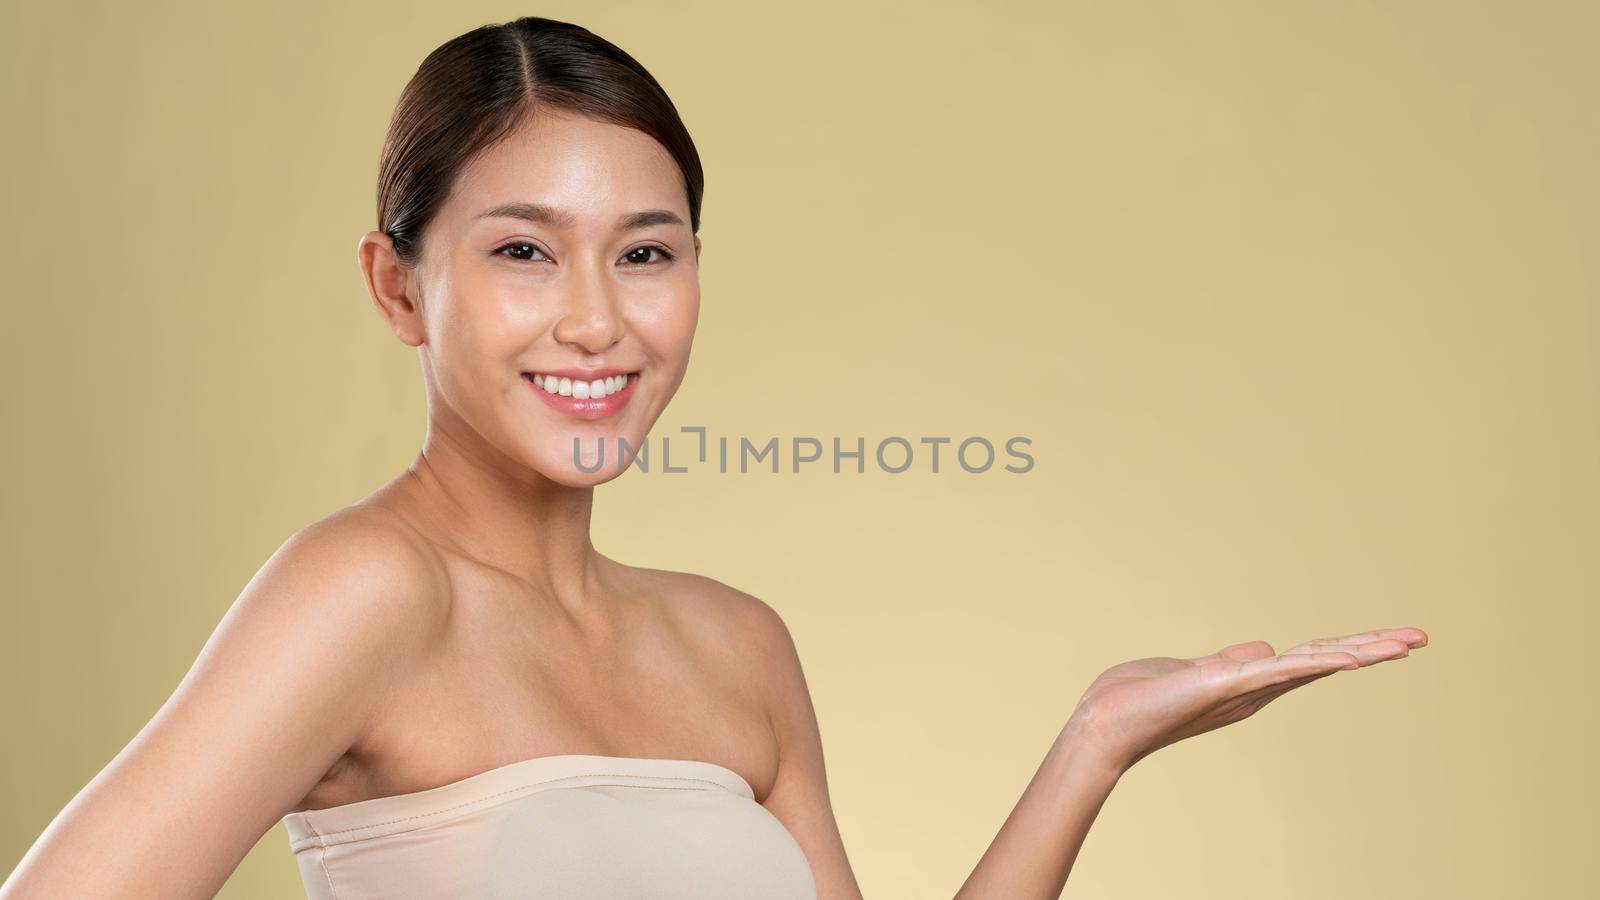 Closeup ardent woman looking at camera, holding empty space for product, advertising text place, isolated background. Concept of healthcare advertising for skincare, beauty care product.